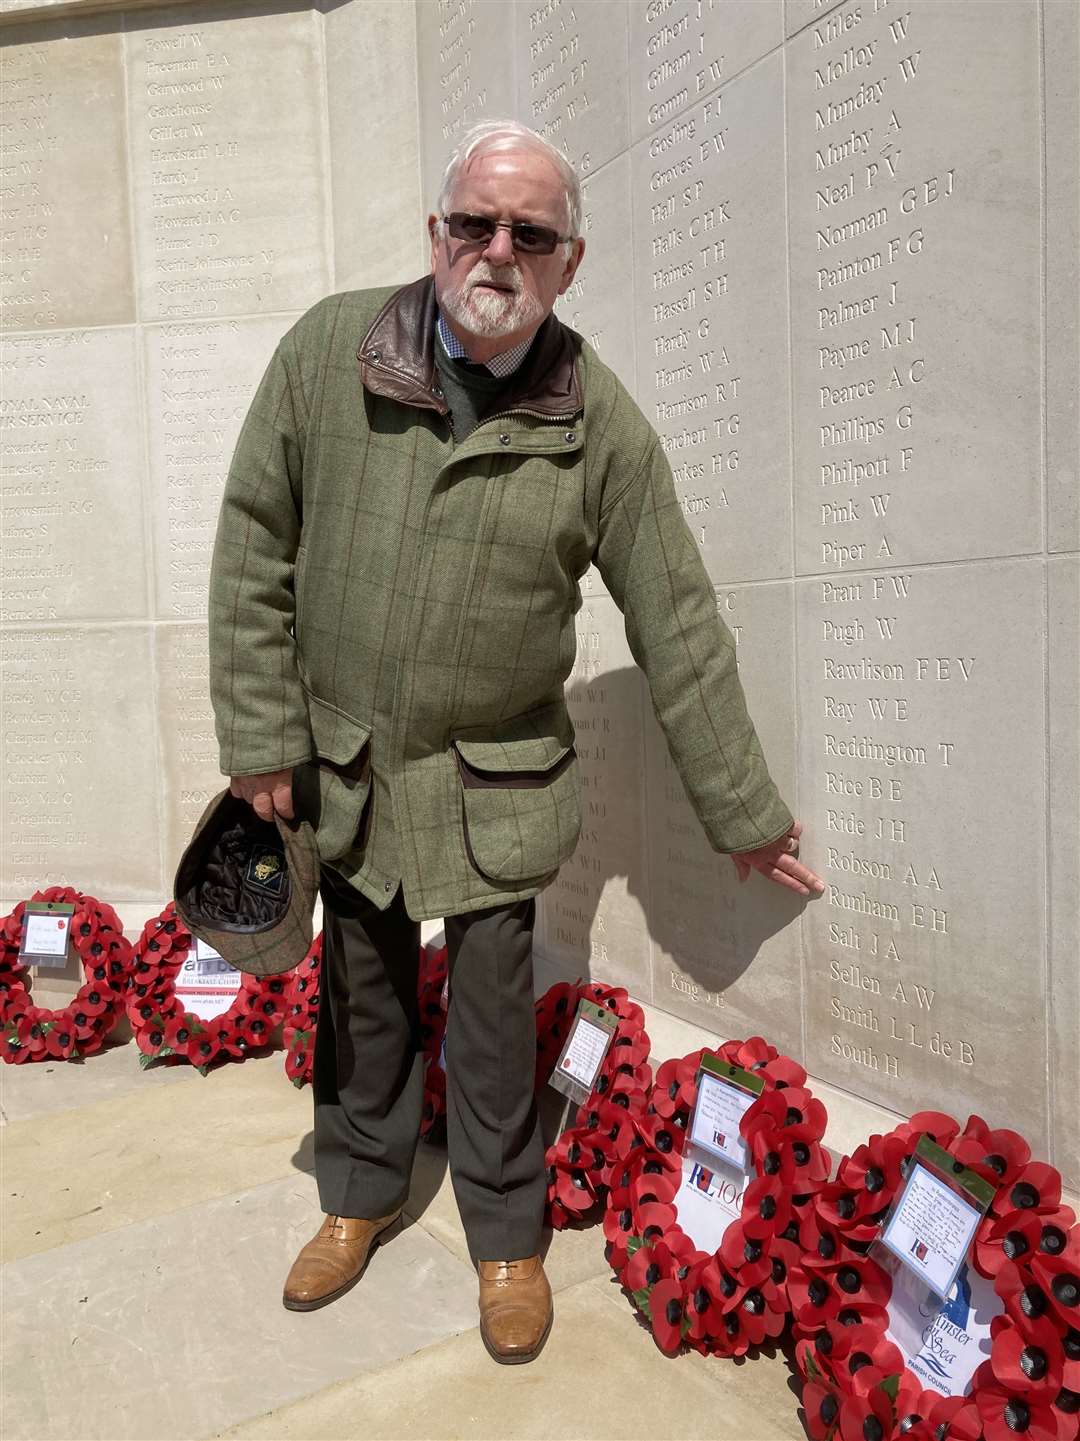 Raymond Nicholls, 77, travelled from Salisbury for the dedication of the new memorial wall in Sheerness. His great uncle's name, Ernest Runham is on the monument